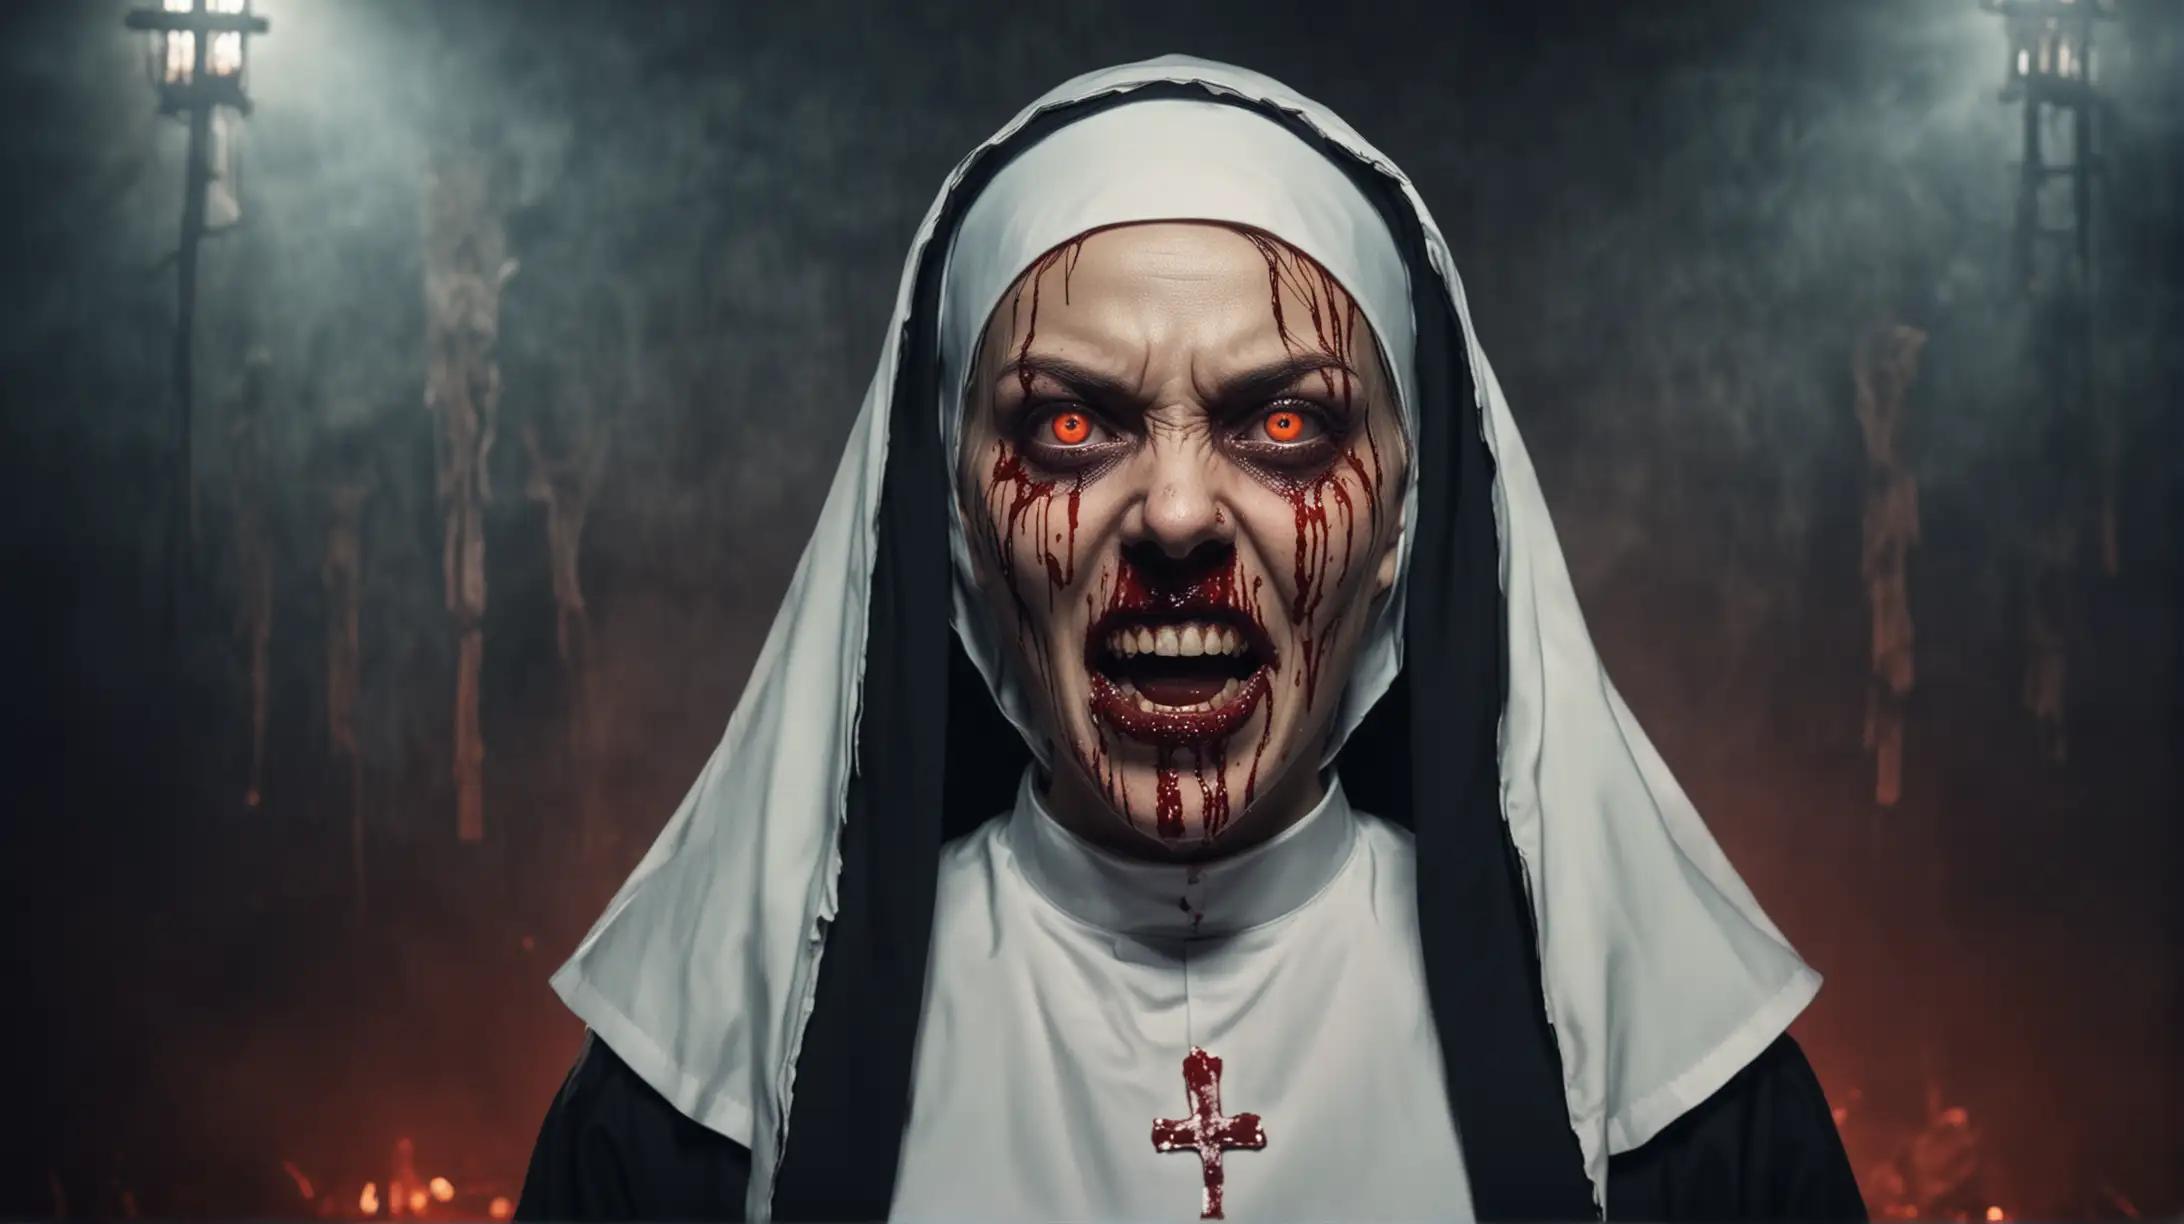 Scary Nun with Sharp Teeth and Luminous Eyes on Bloody Horror Background